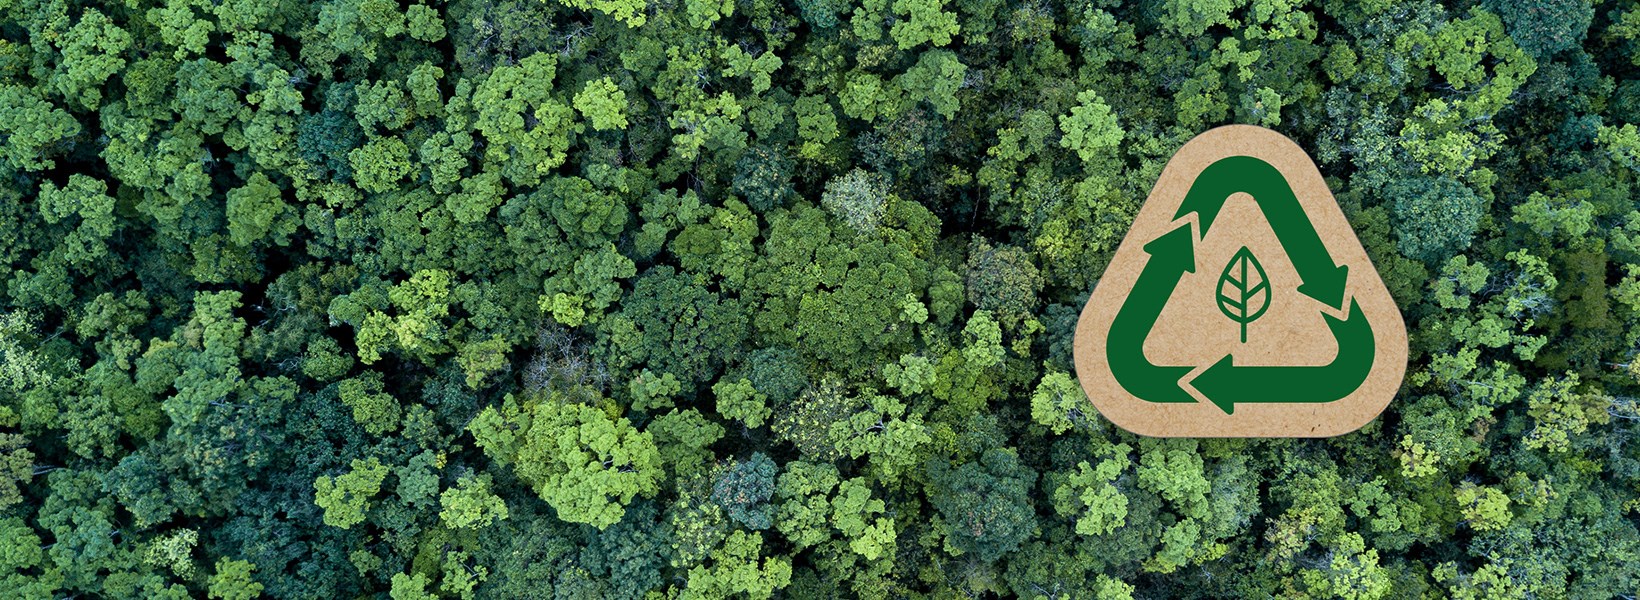 Overhead view of forest with recycling icon